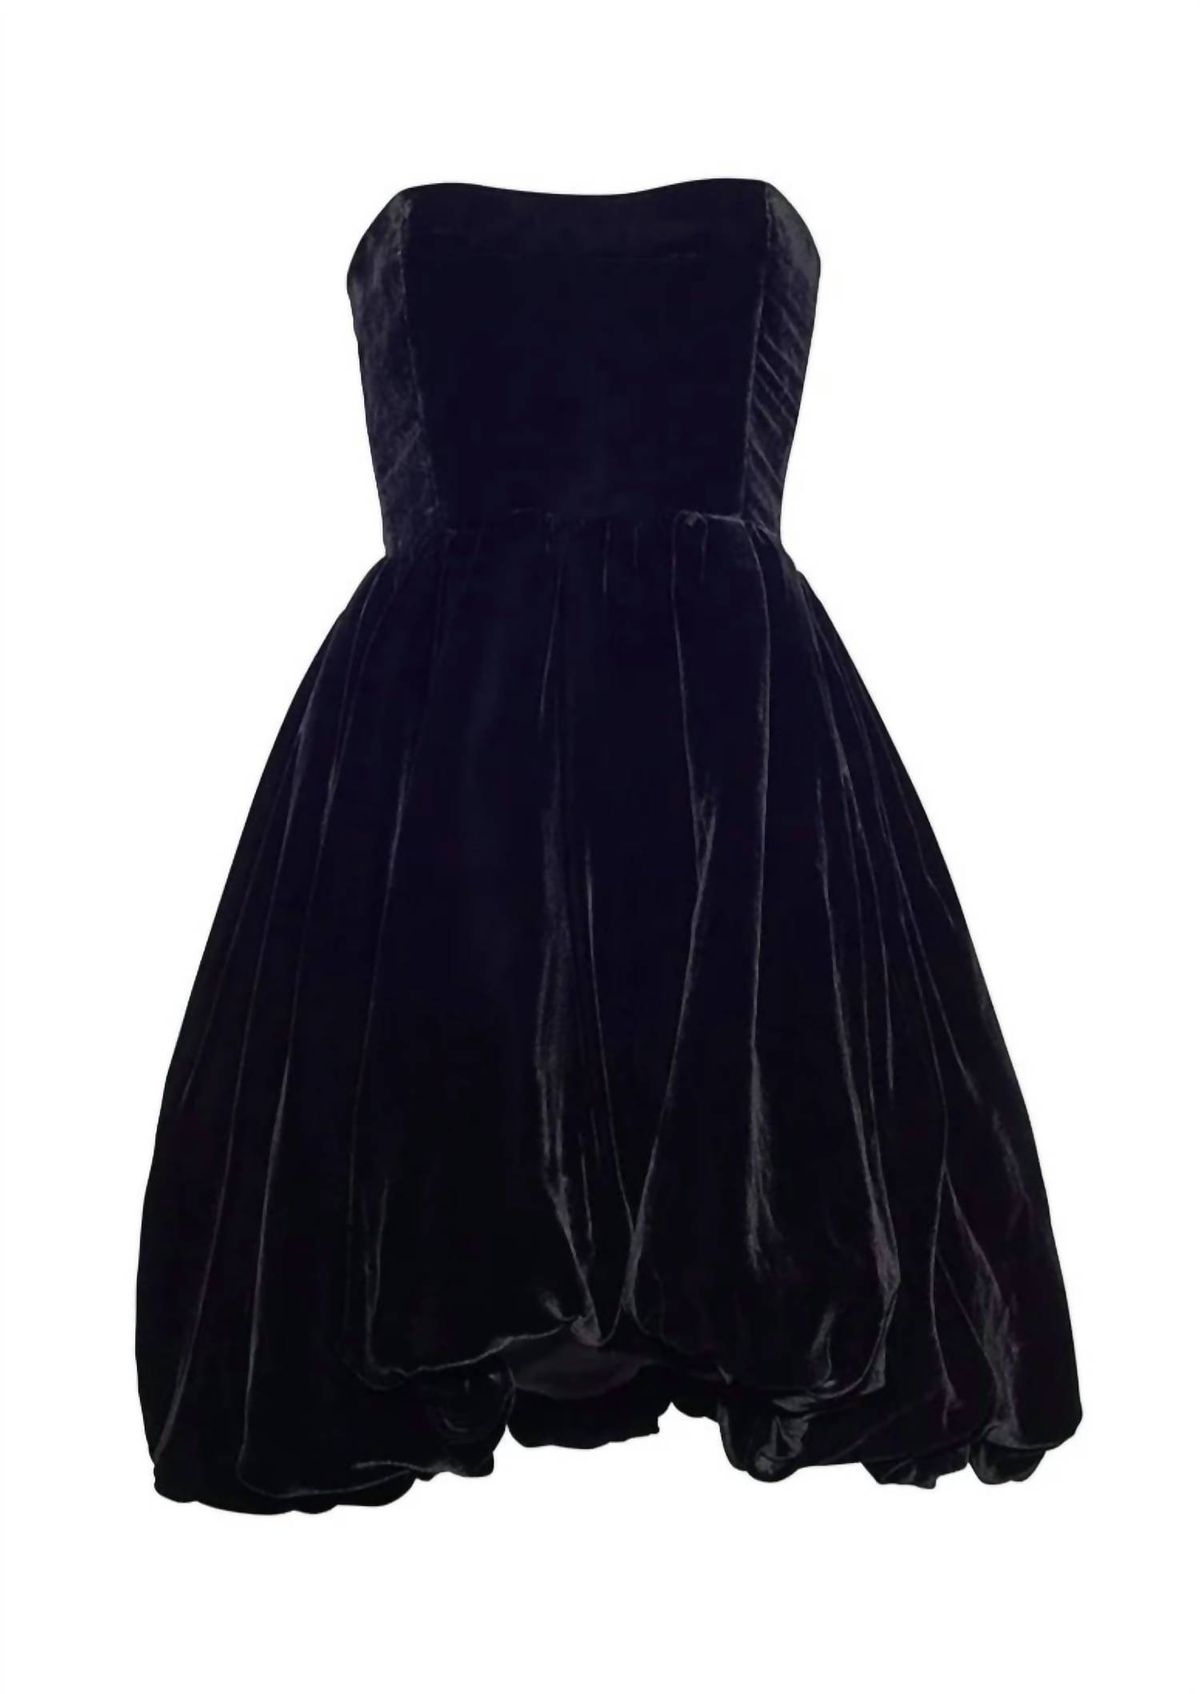 Style 1-2180039089-1901 Cara Cara Size 6 Strapless Velvet Black Cocktail Dress on Queenly